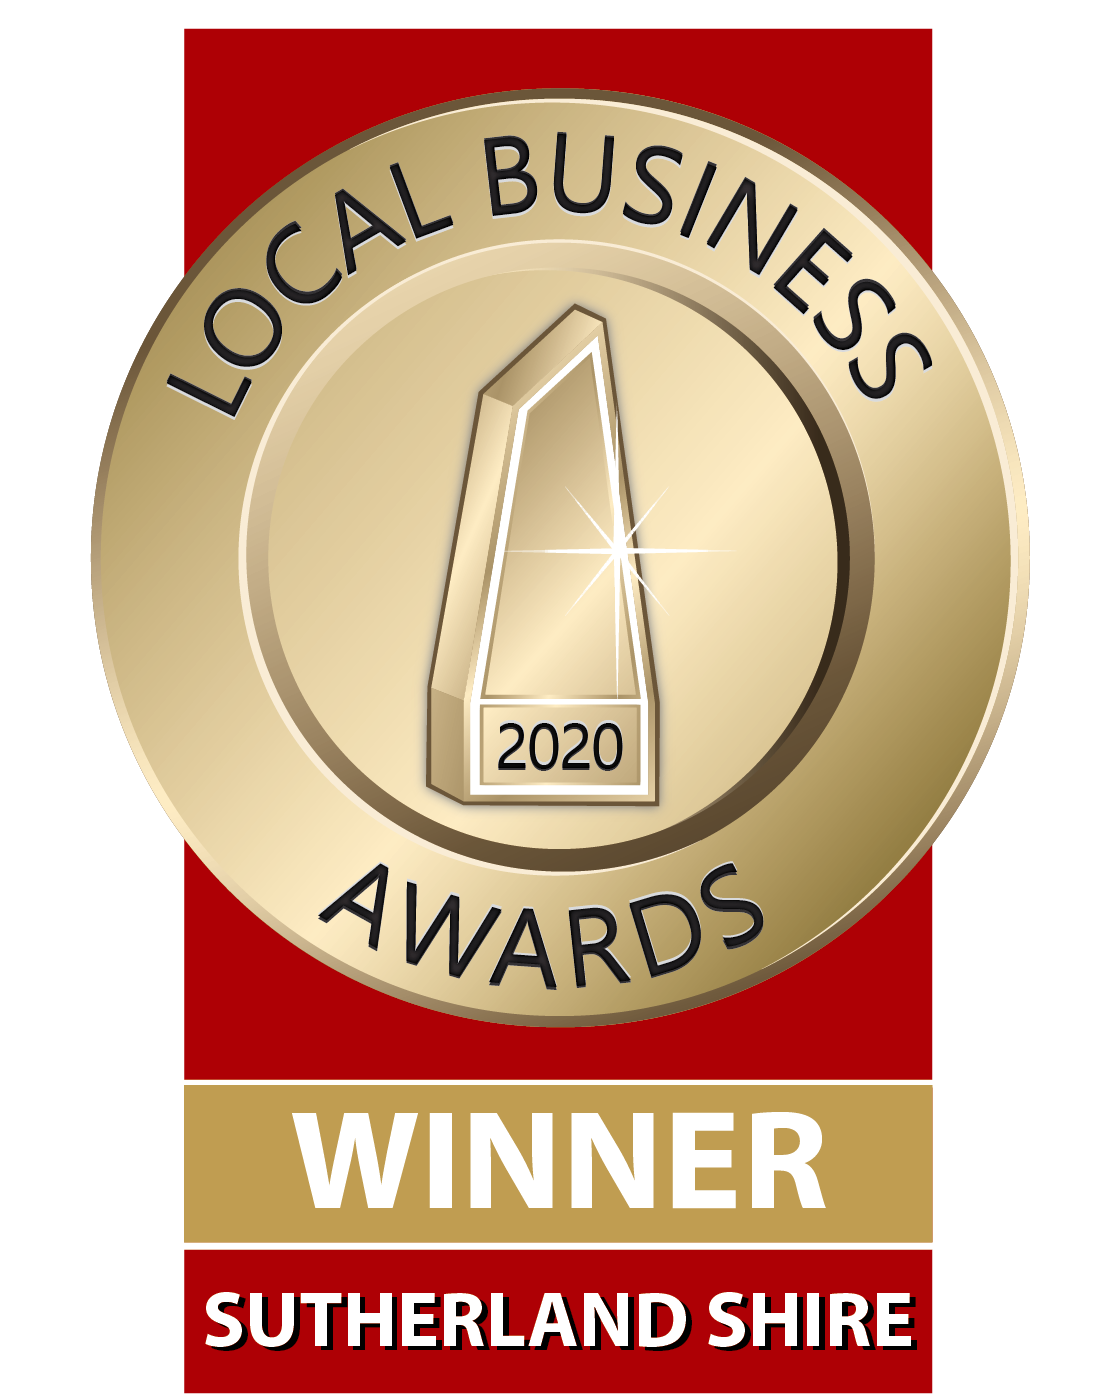 2020 Winner Southerland Shire Local Business Awards